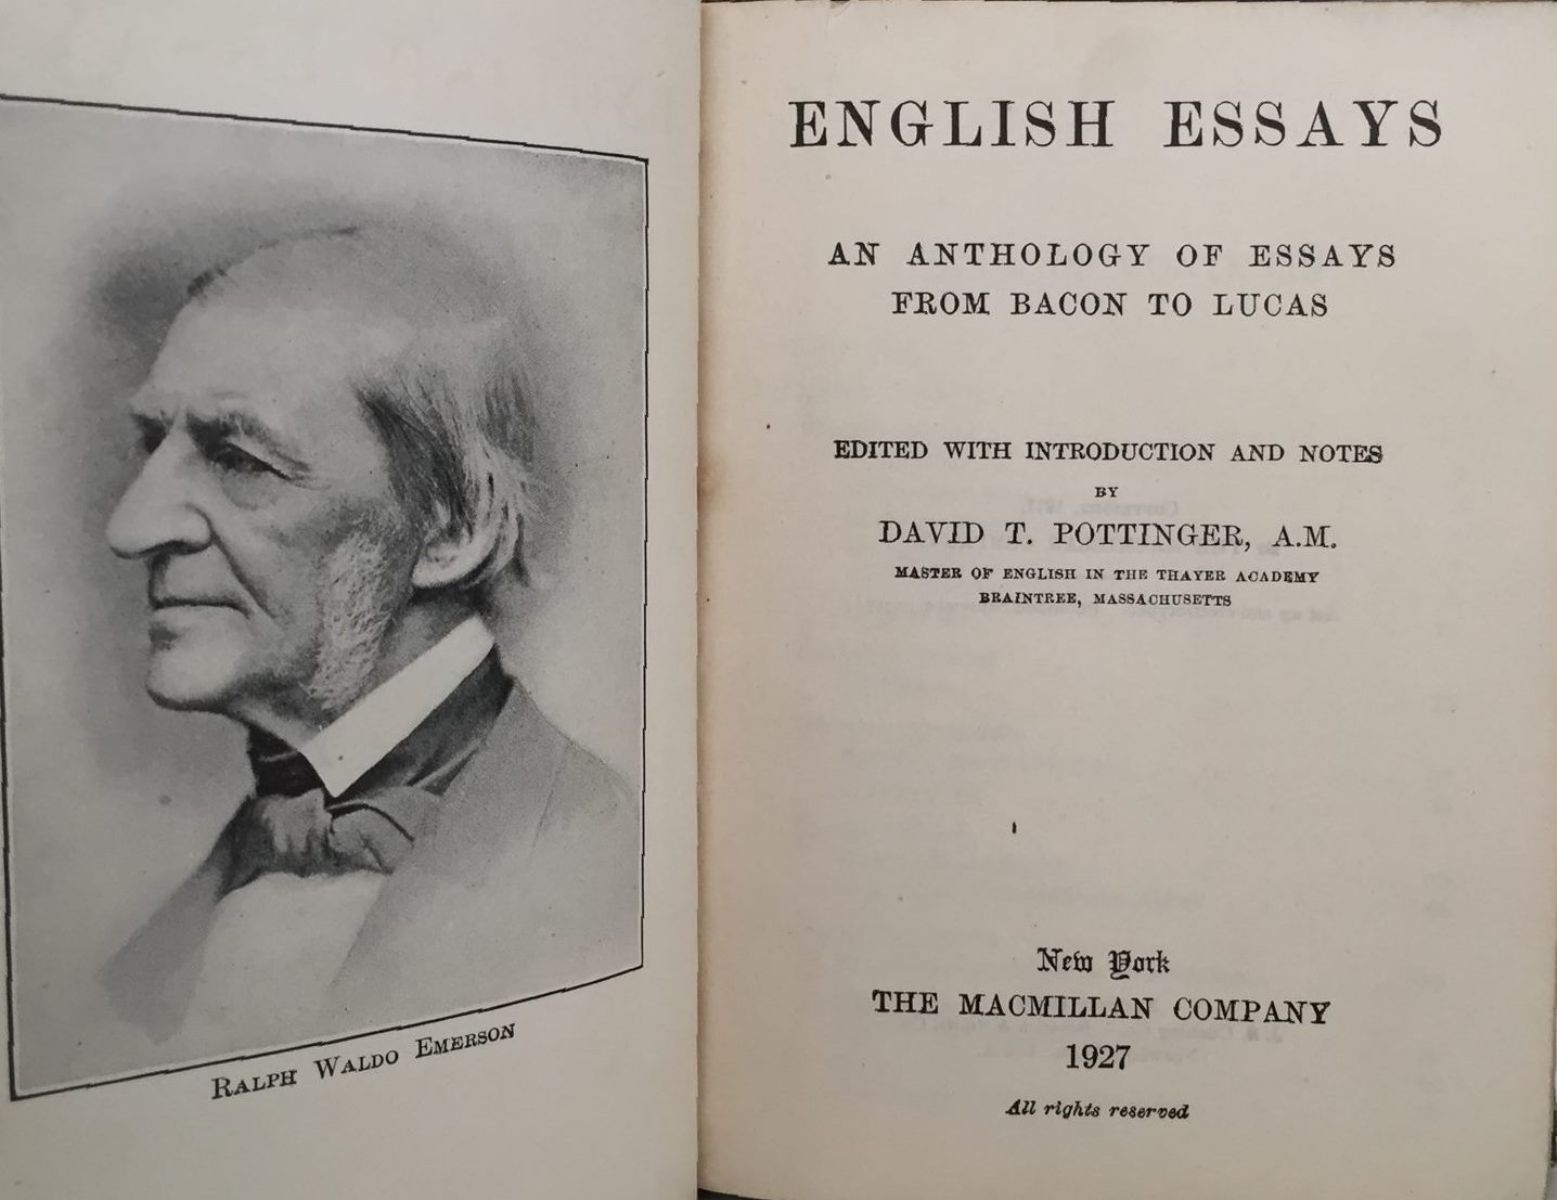 ENGLISH ESSAYS: An anthology of essays from Bacon to Lucas